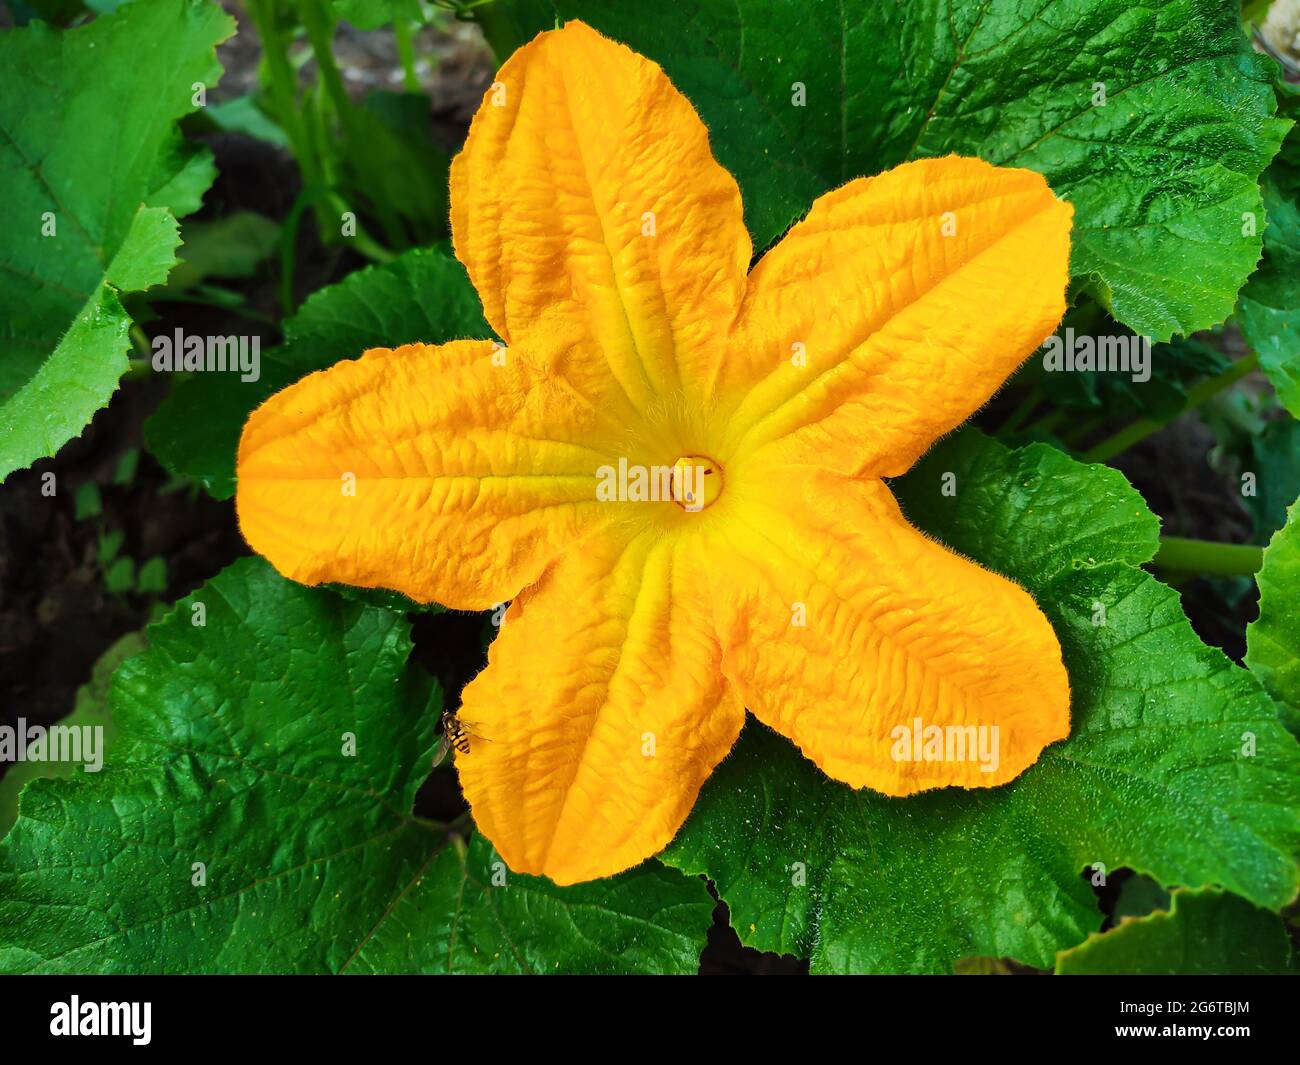 Yellow flower of zucchini or courgette in summer organic garden Stock Photo